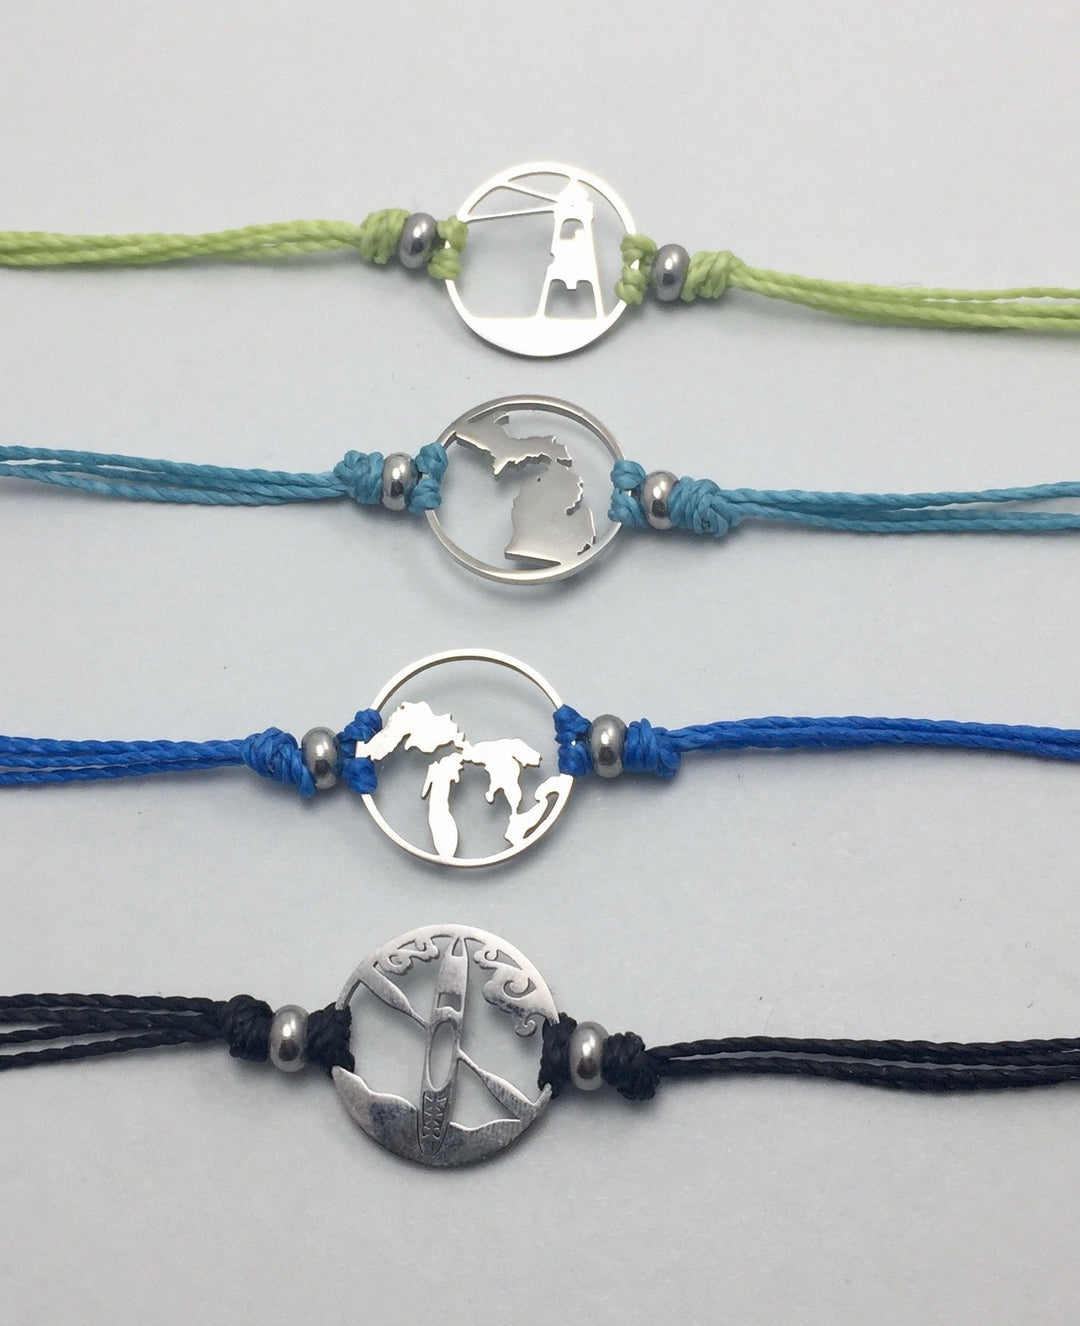 Michigan Pull Cord Anklet - Be Inspired UP